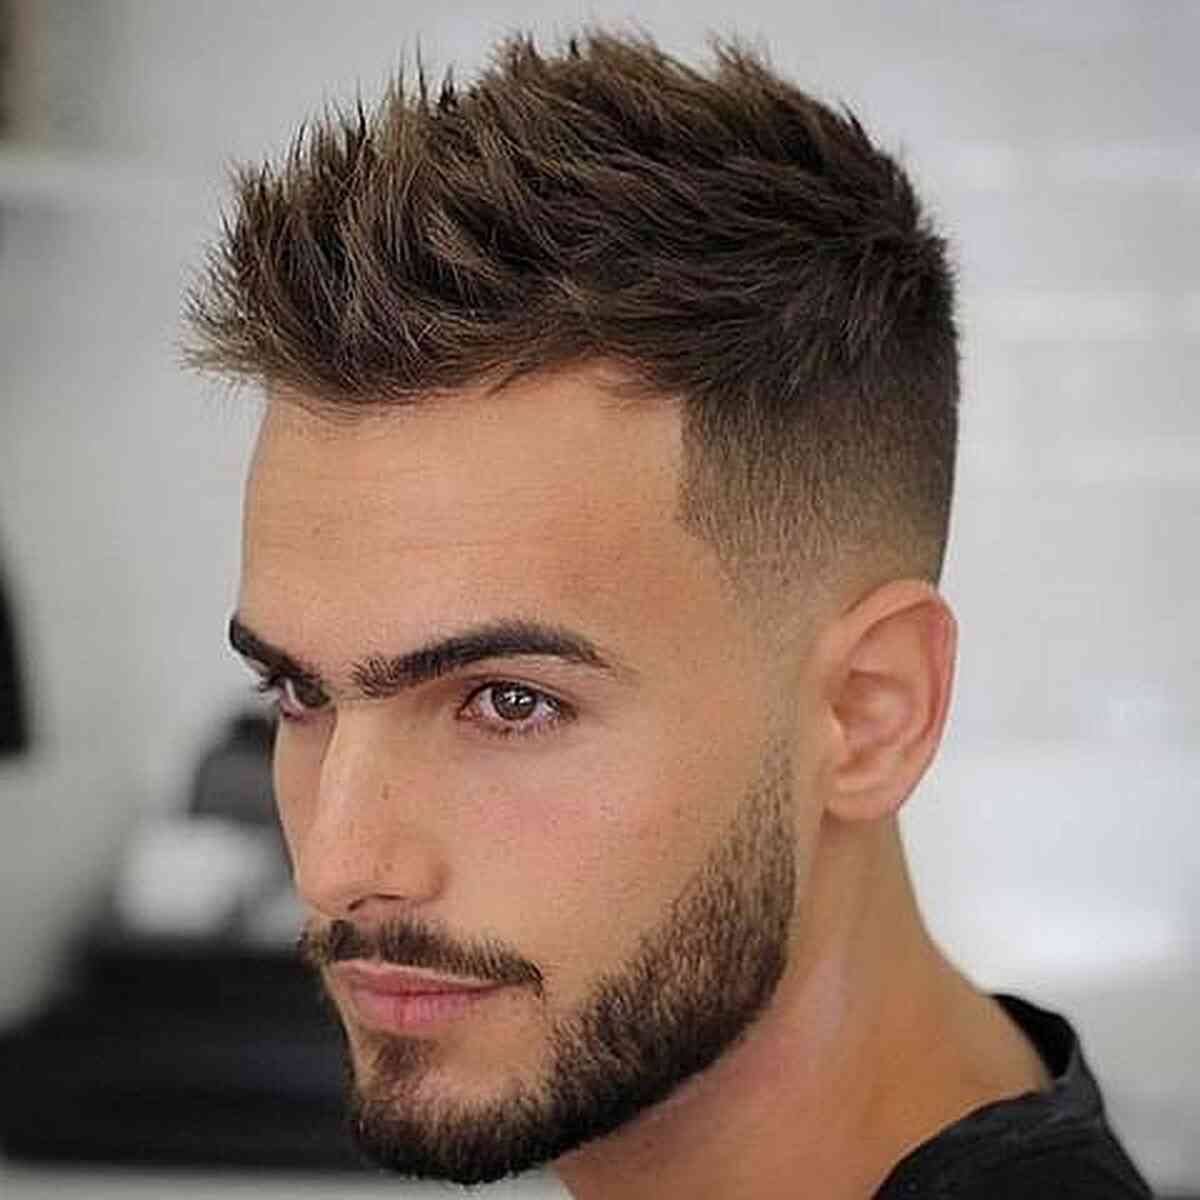 Hair Color for Men: 34 Examples Ranging from Vivids to Natural Hues